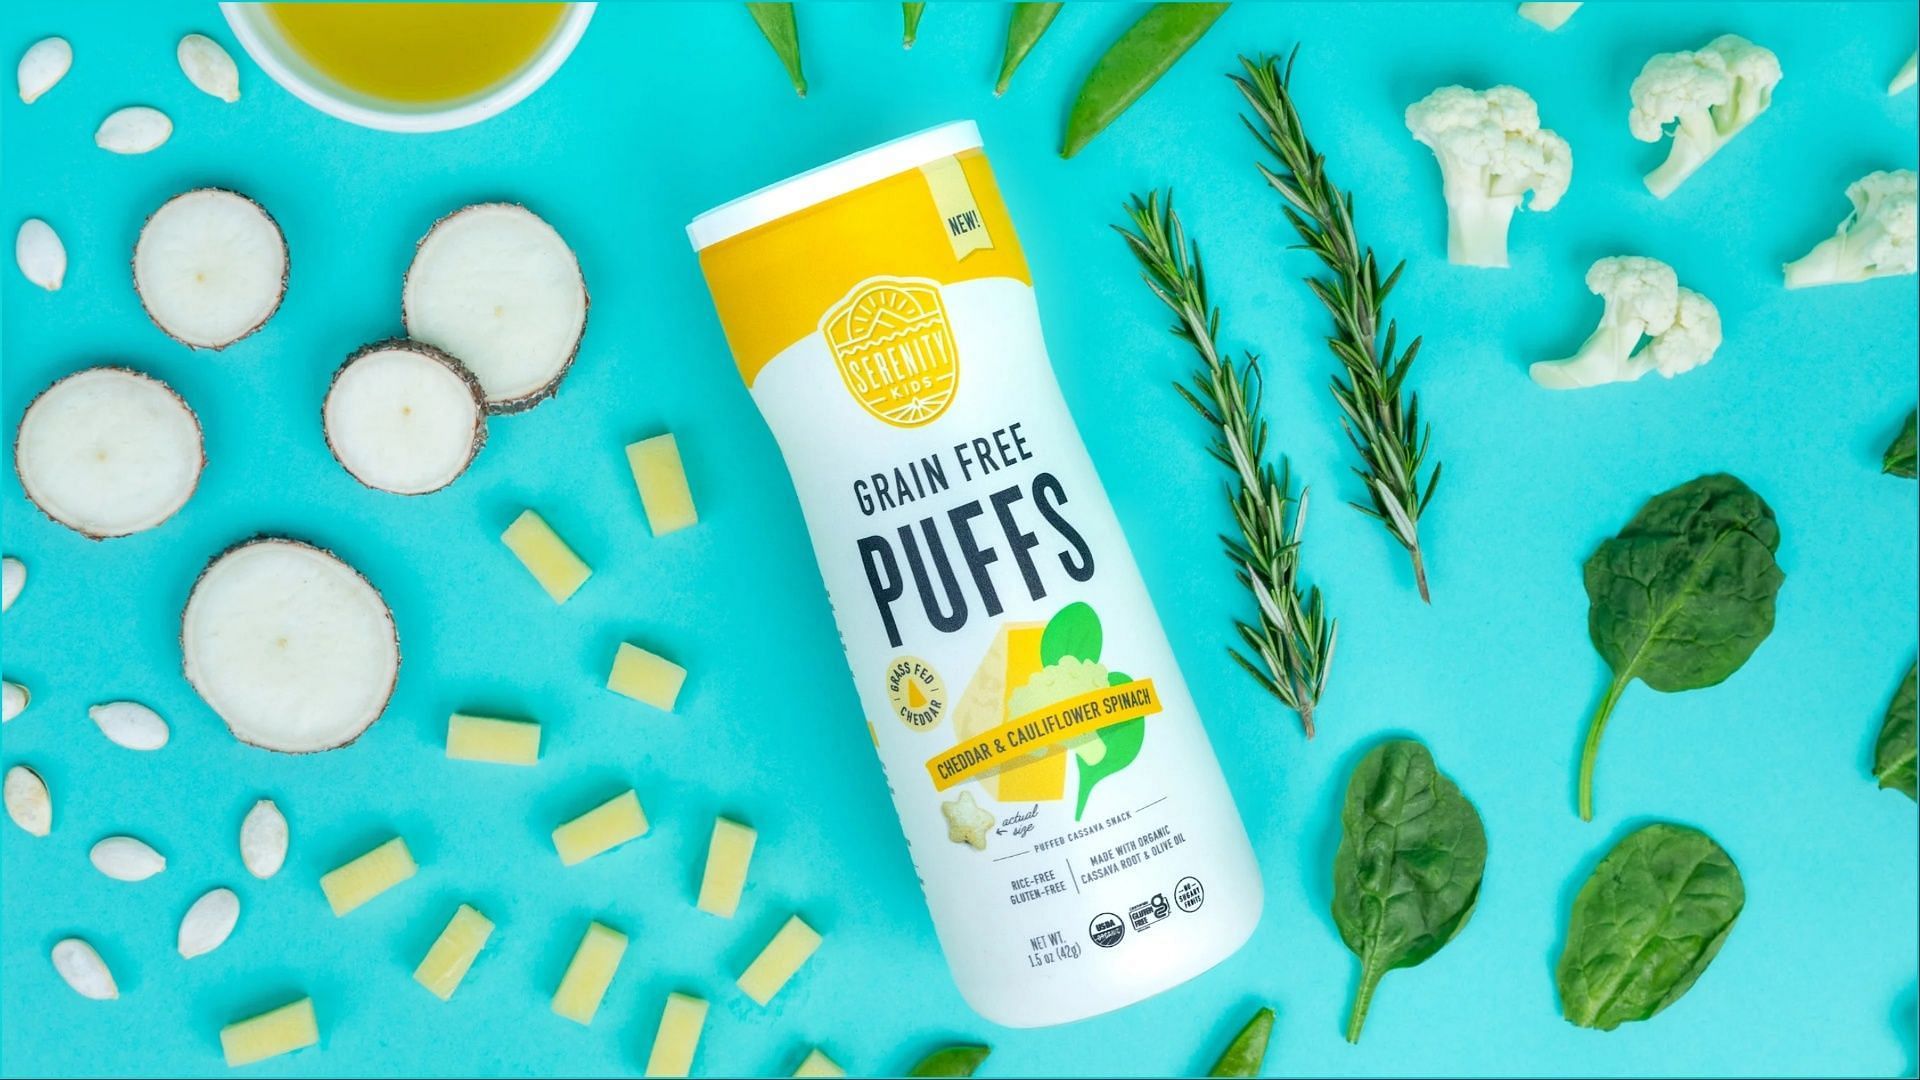 The new White Cheddar with Cauliflower &amp; Spinach puffed snack is priced at over $5.49 (Image via Serenity Kids)